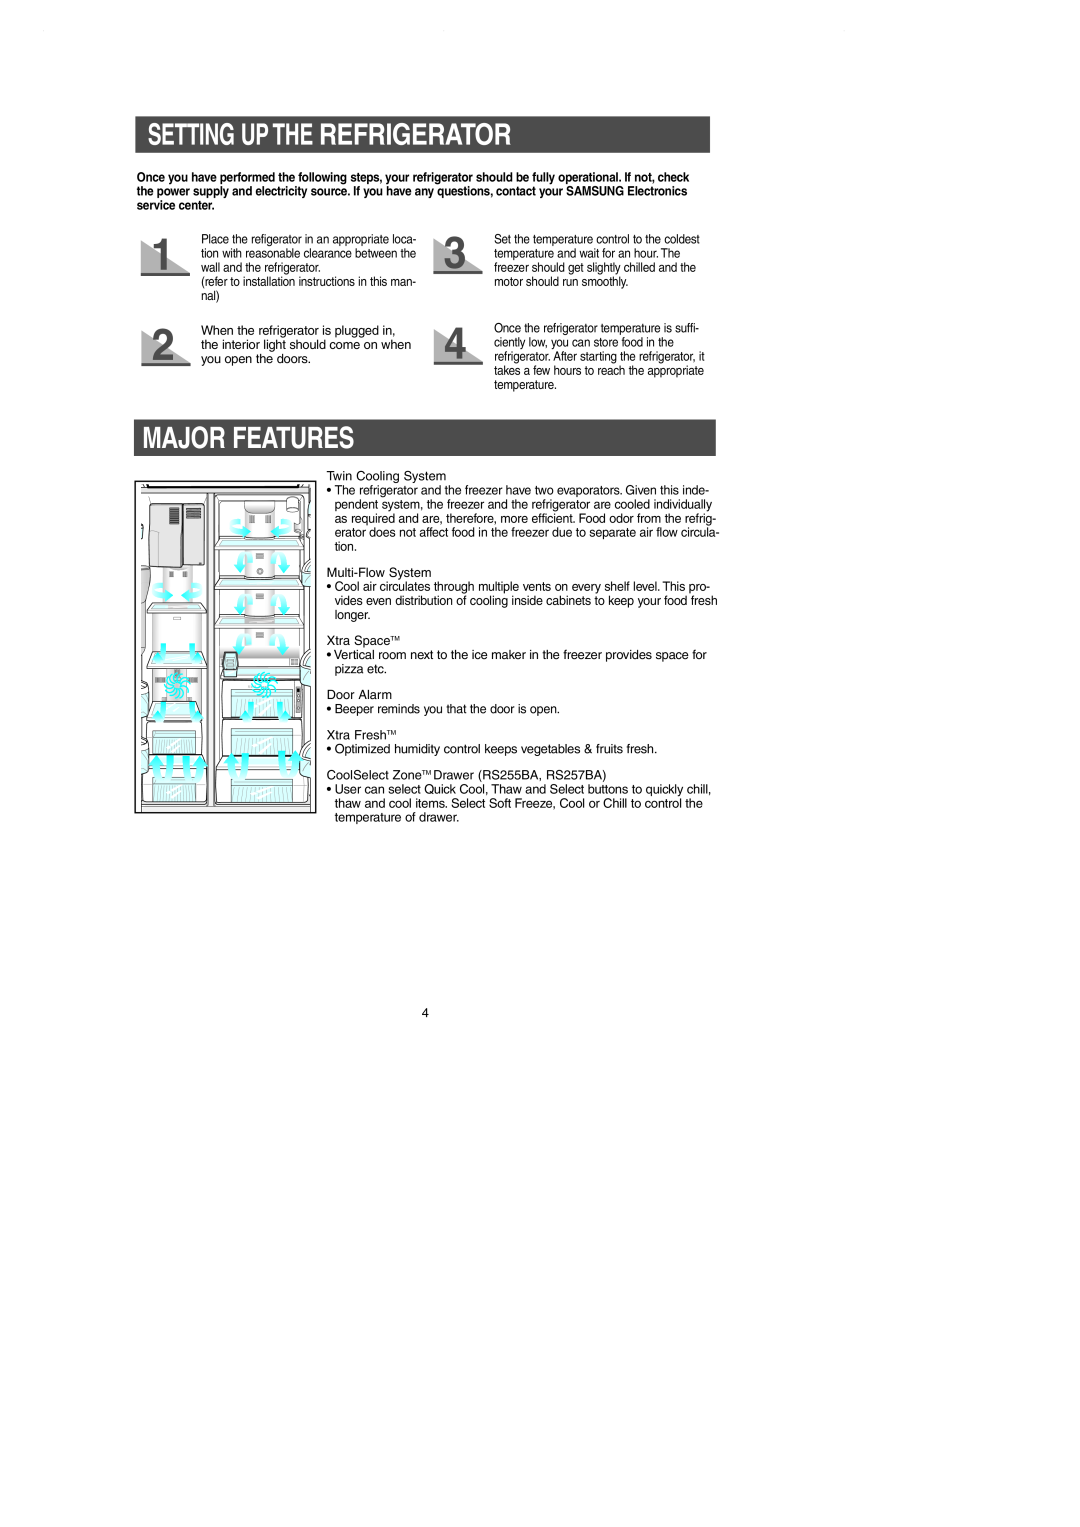 Samsung RS257BAWW owner manual Setting Up The Refrigerator, Major Features 